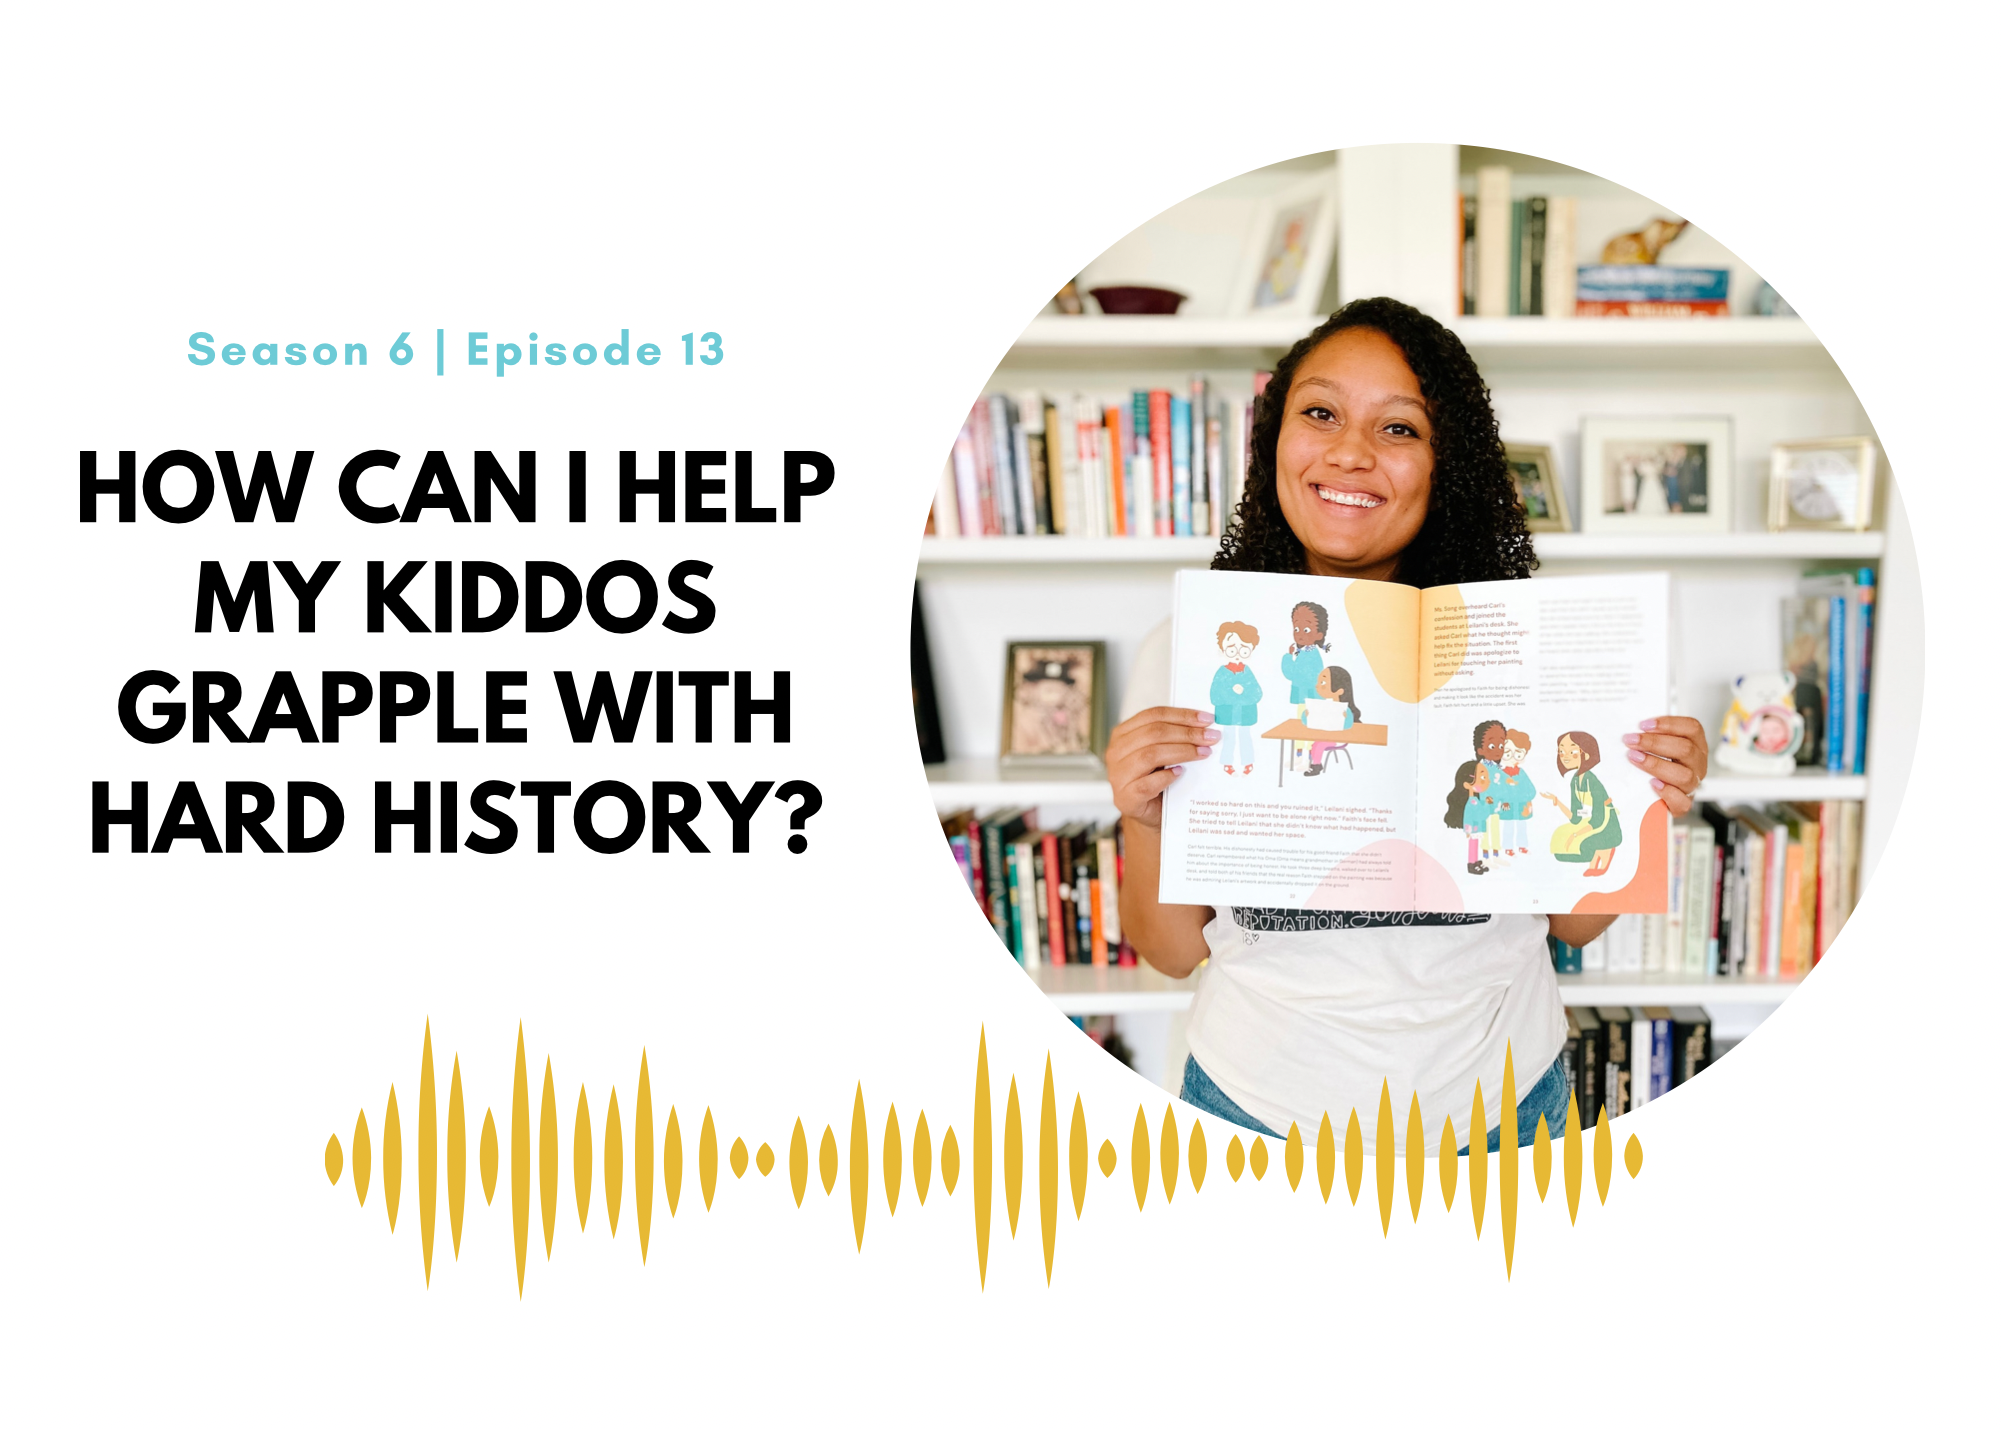 How Can I Help My Kiddos Grapple With Hard History?